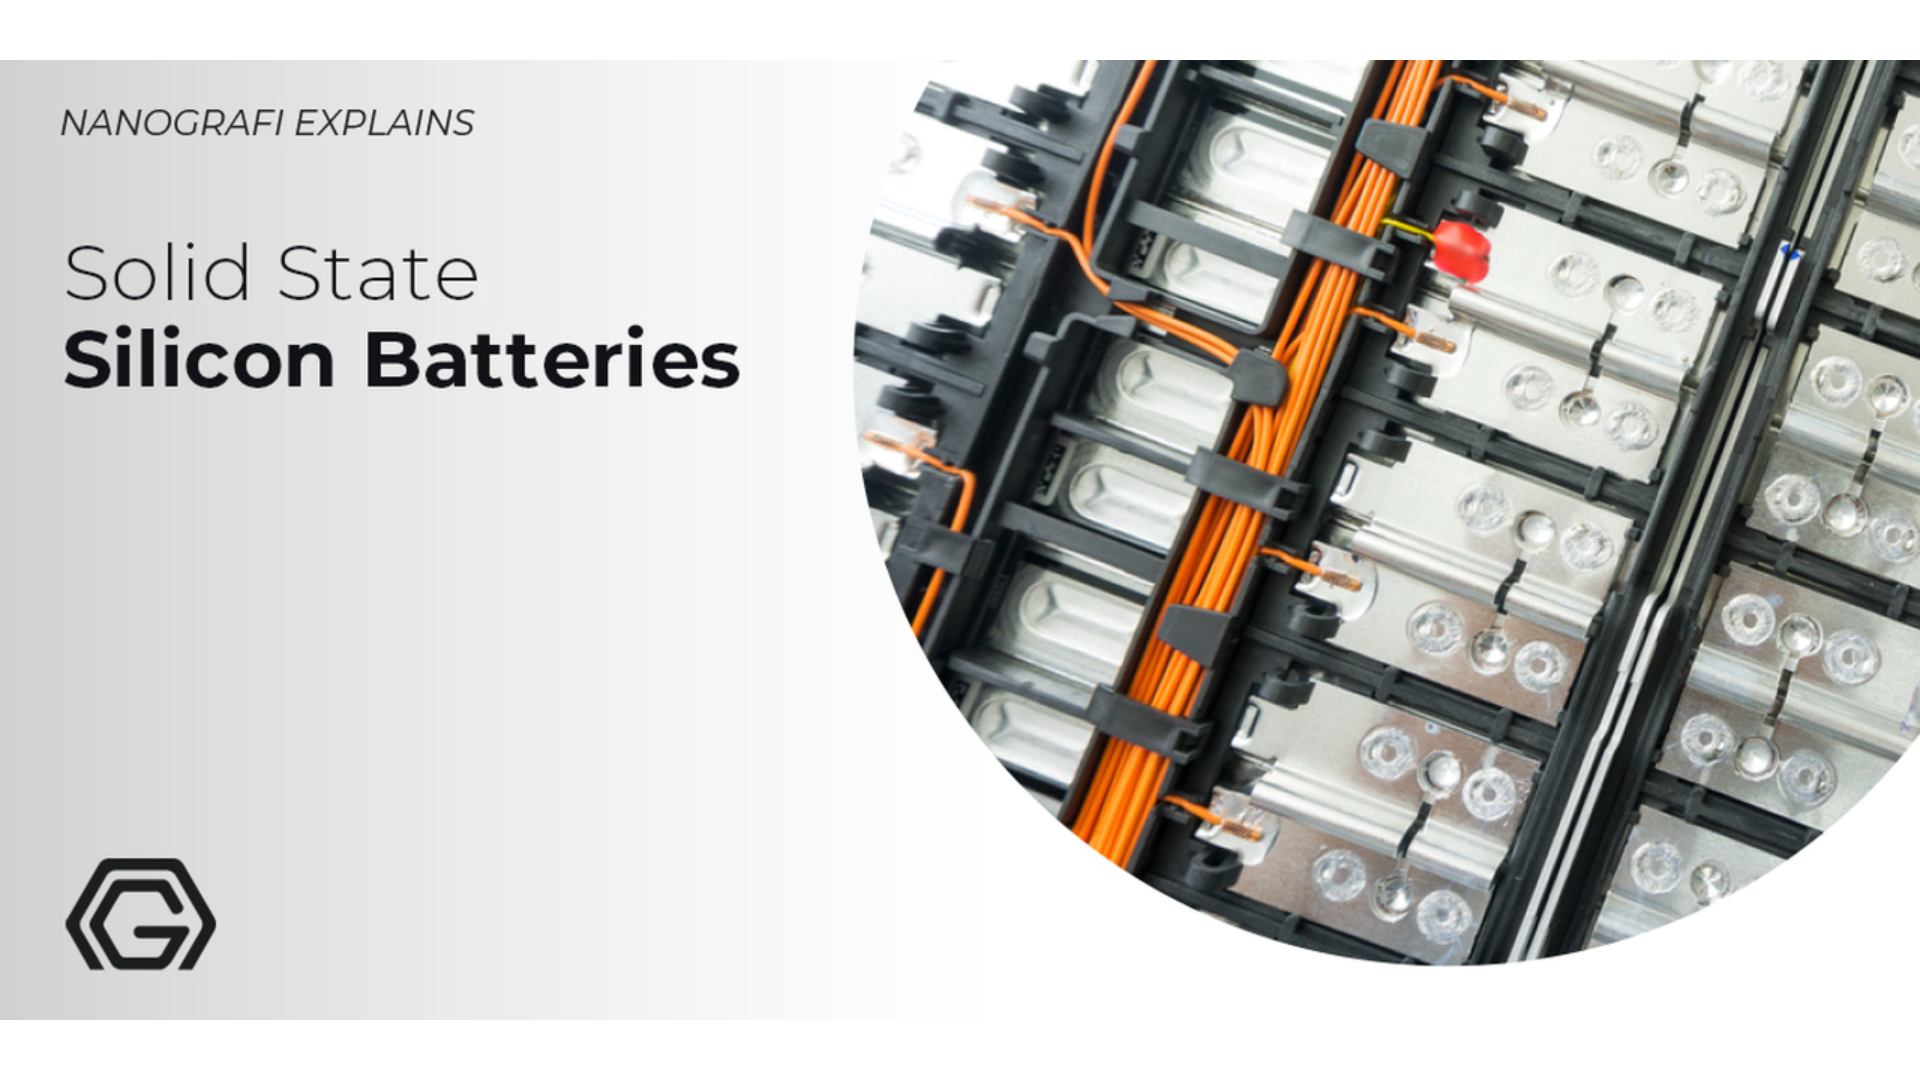 Solid state silicon batteries